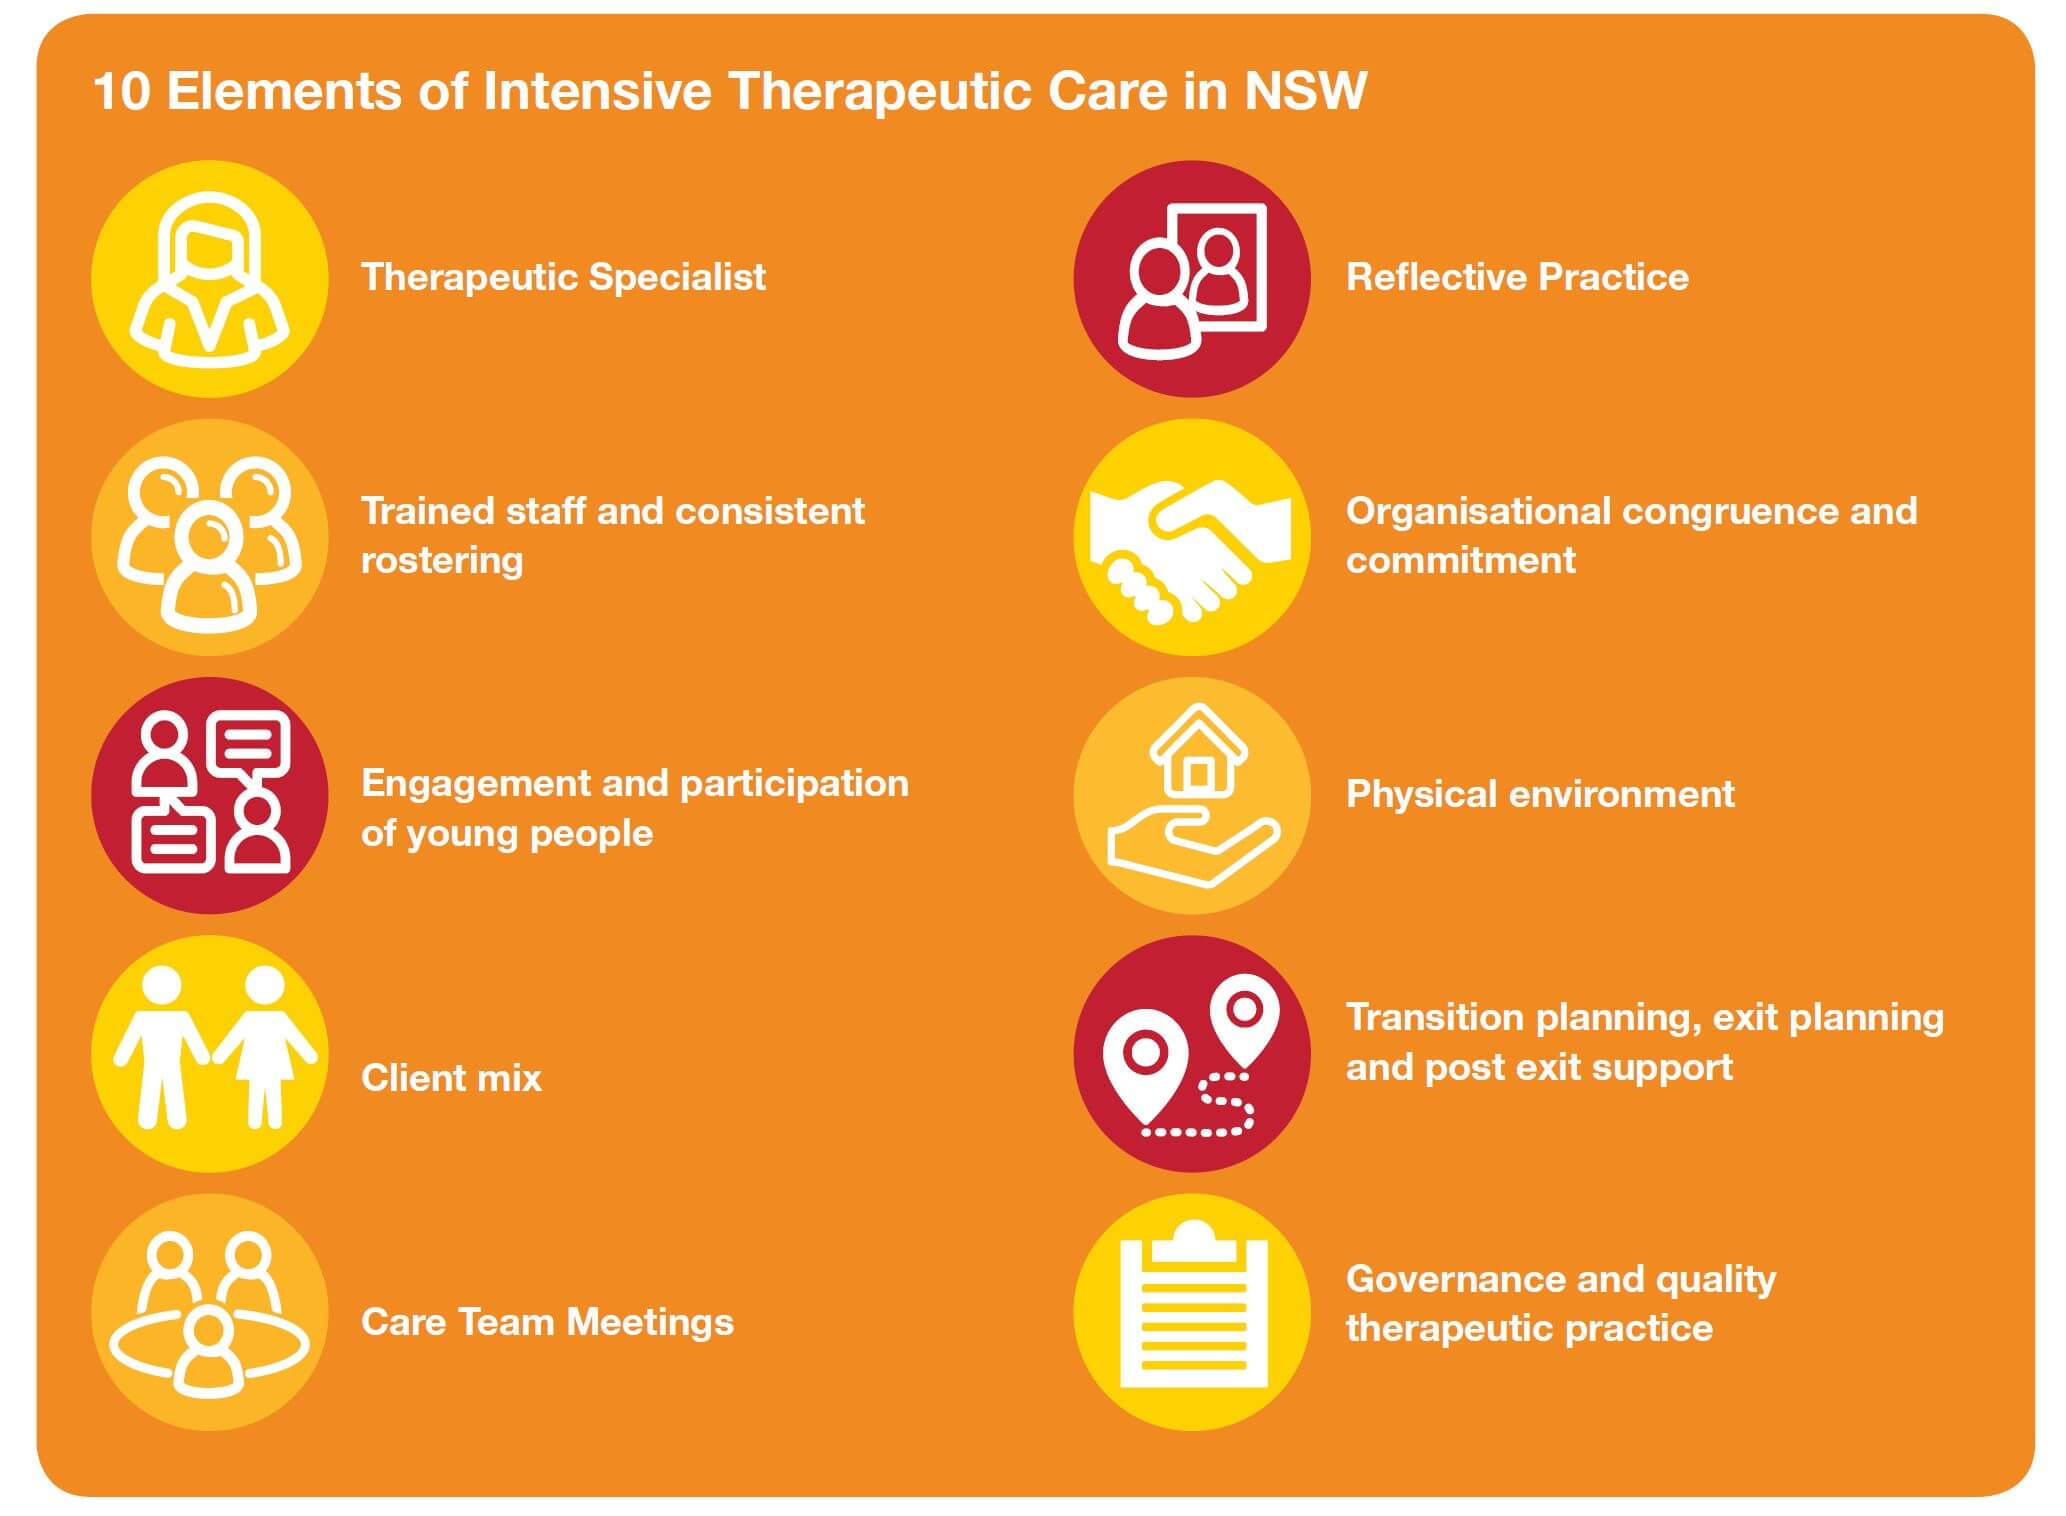 What are the 10 essential elements of the Intensive Therapeutic Care System in NSW?